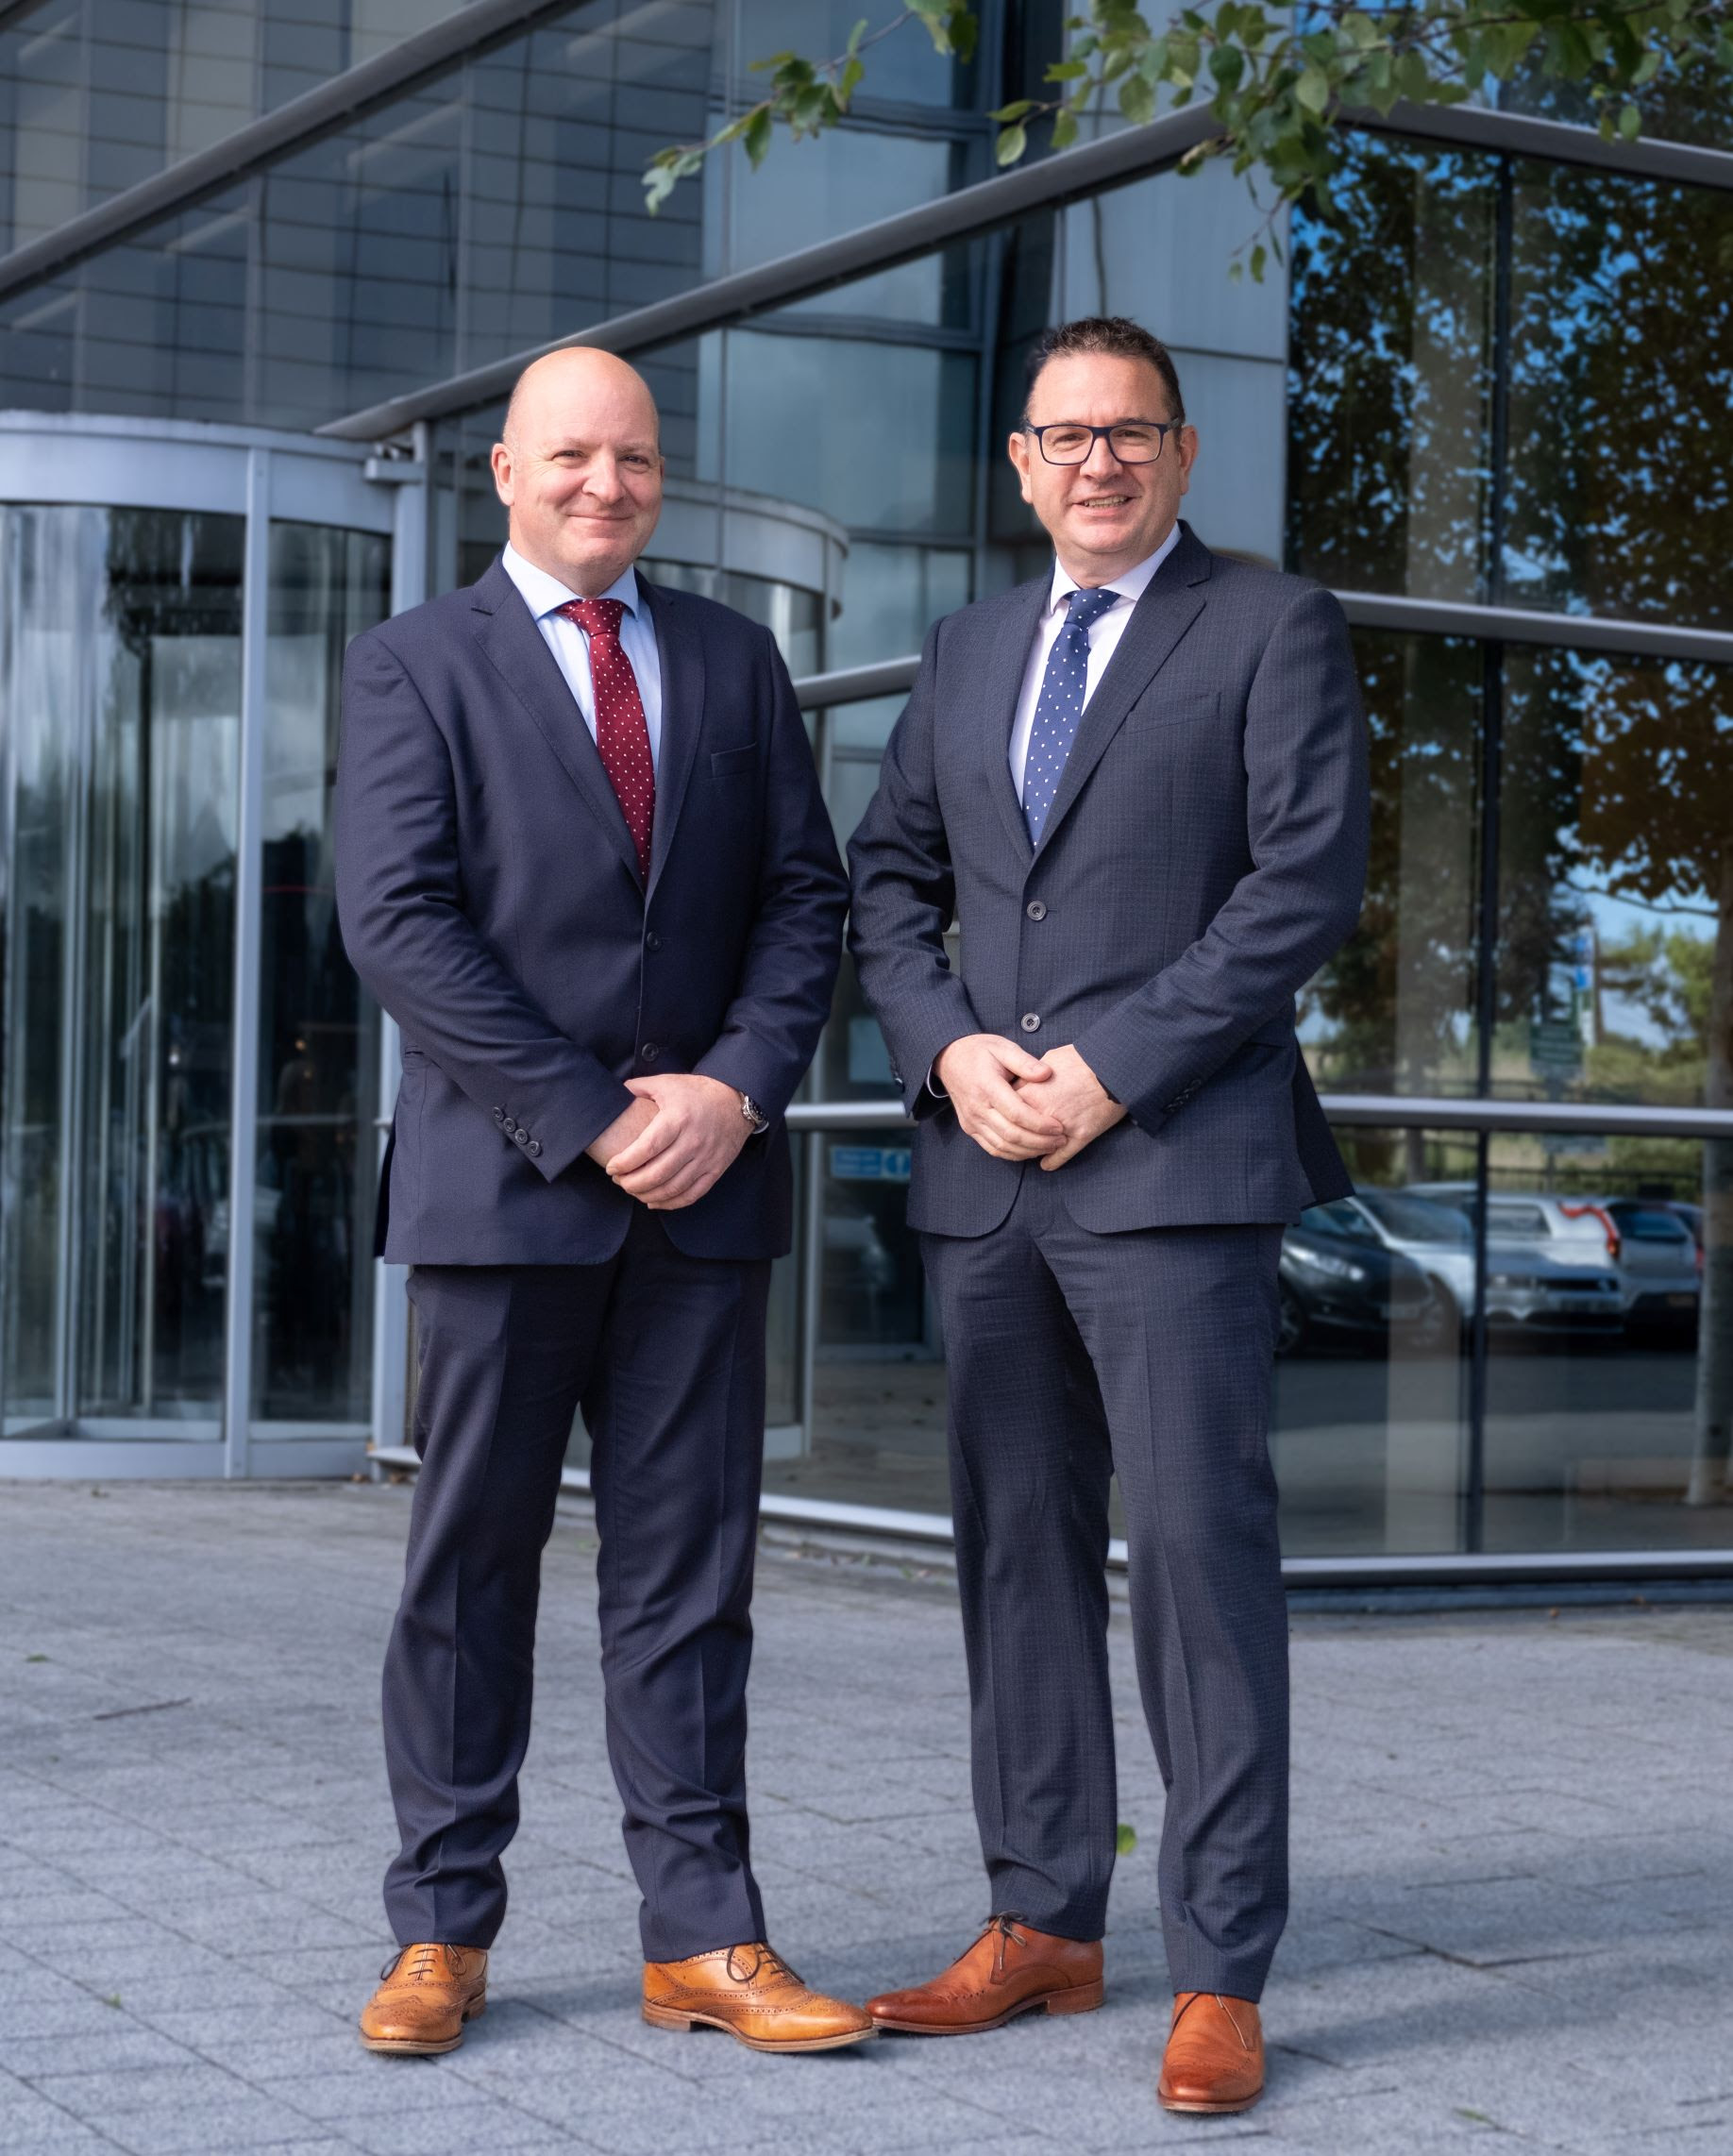 Almac appoints new COO